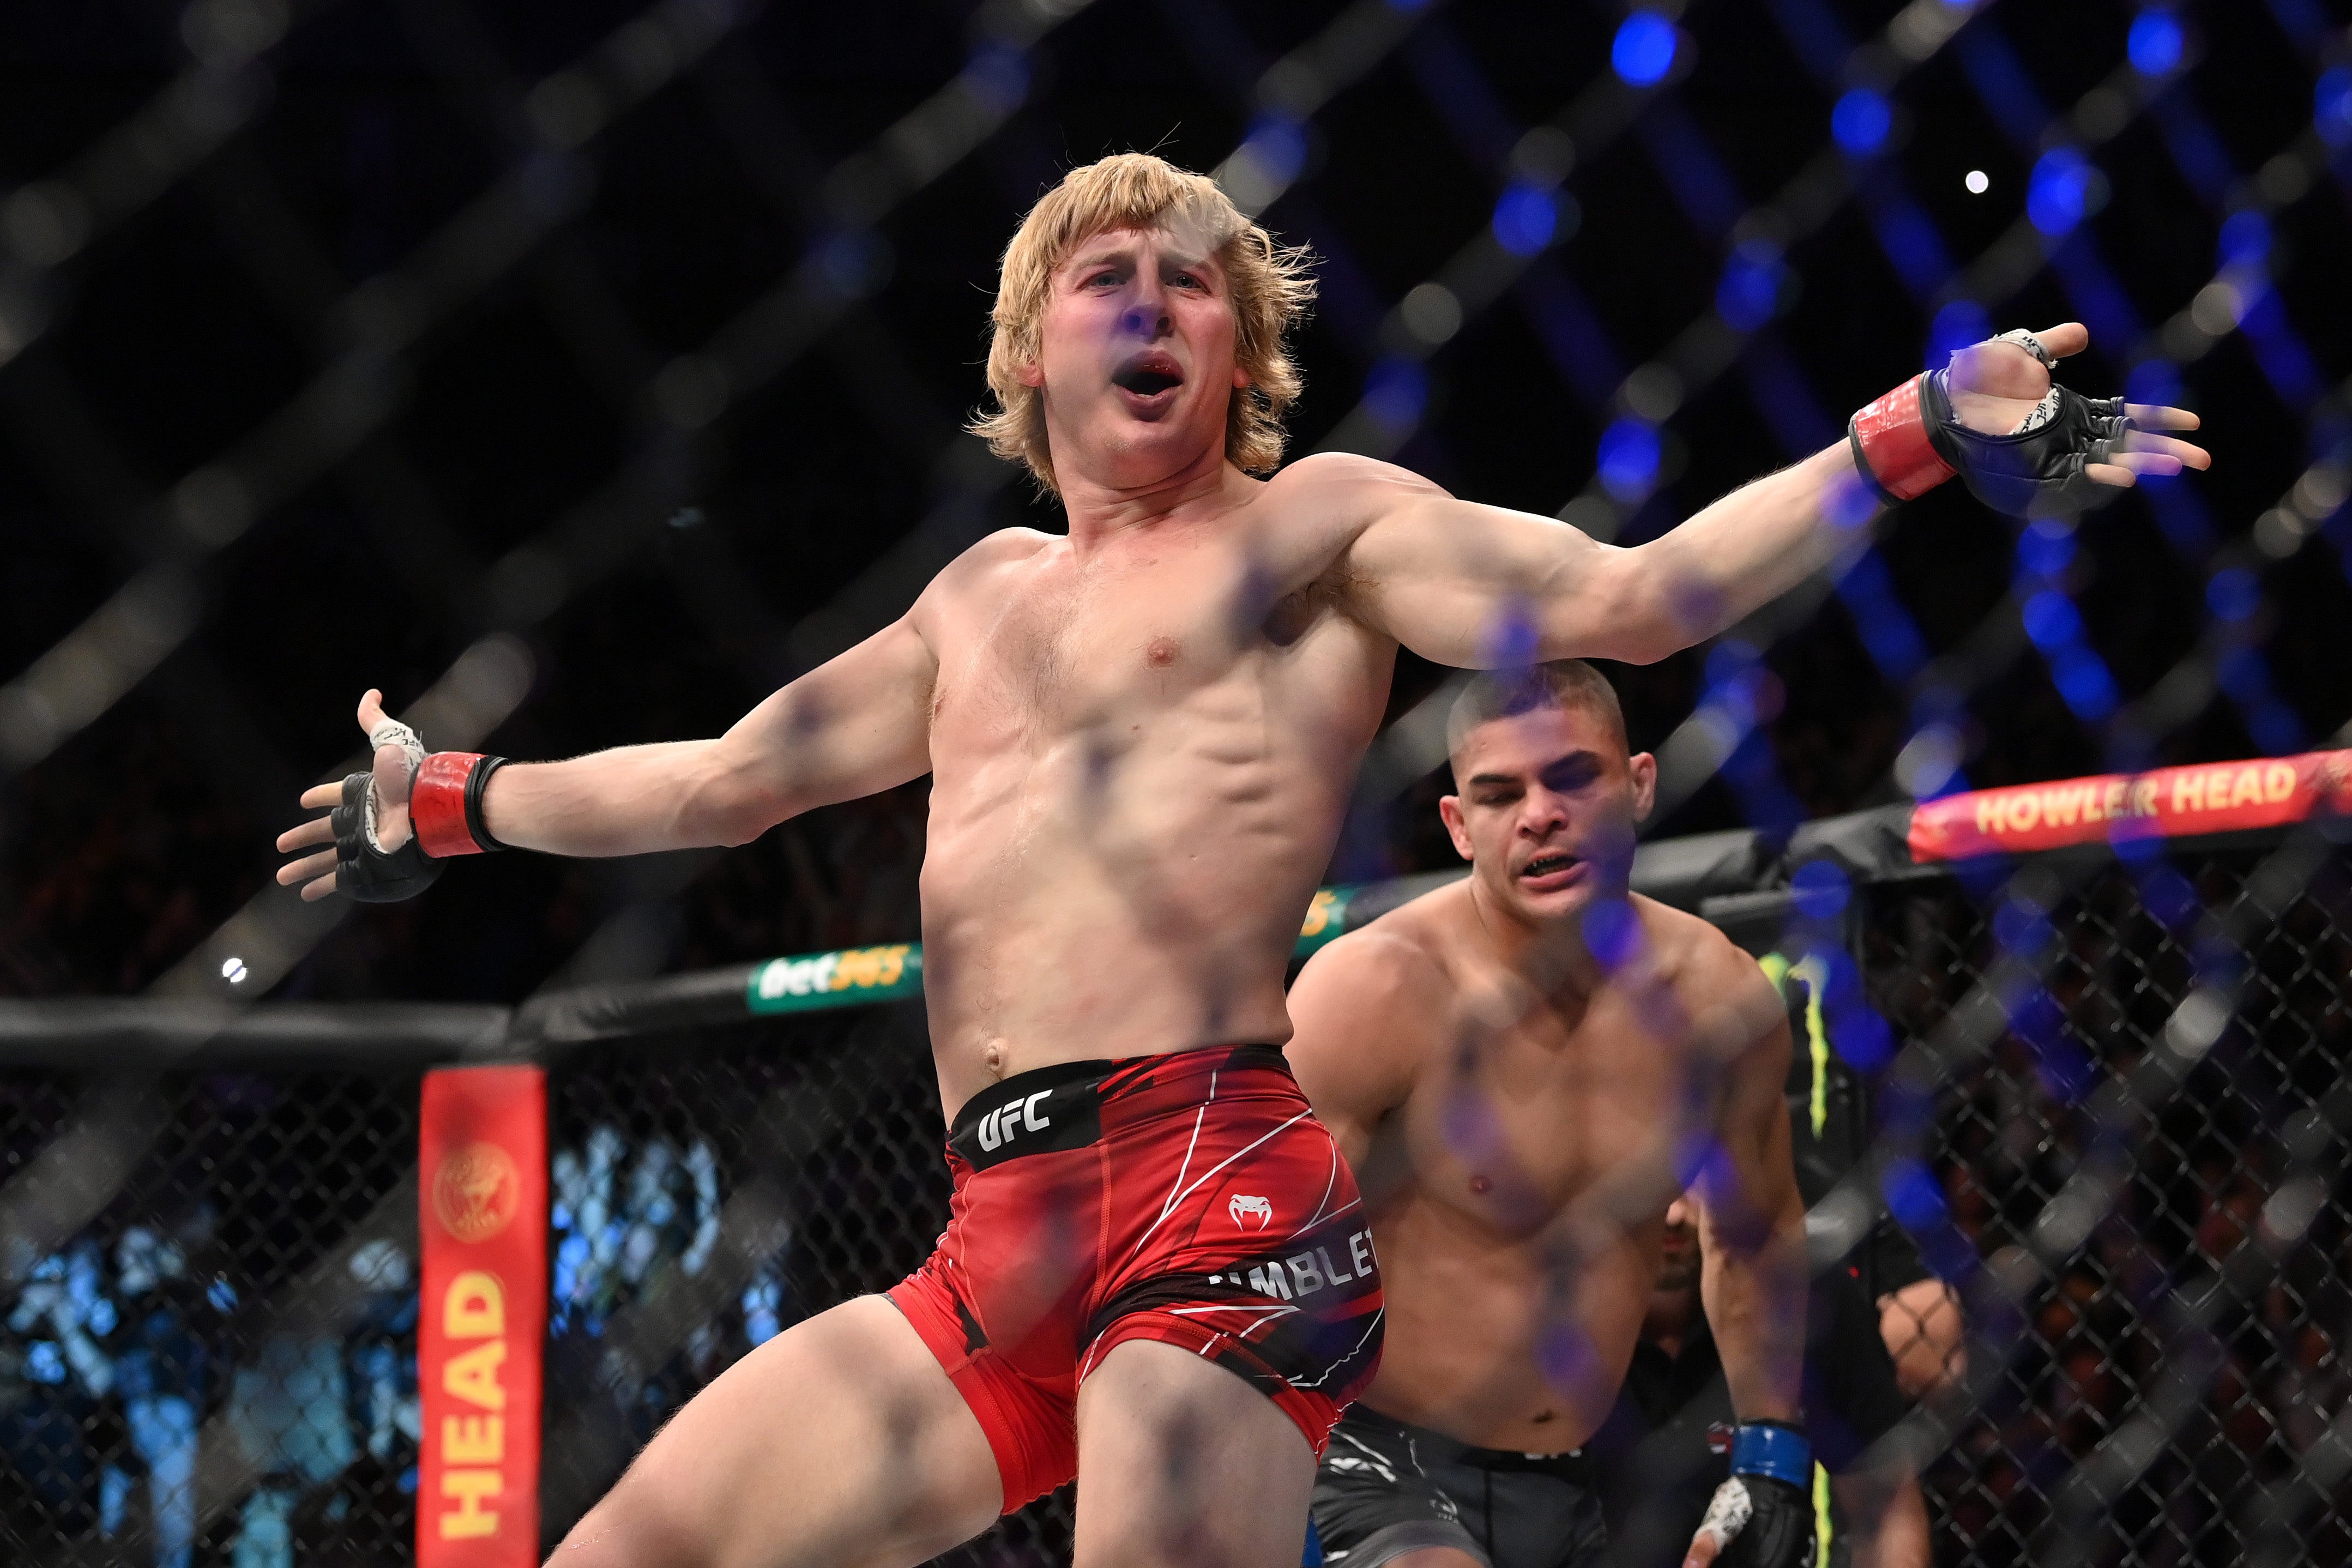 Paddy Pimblett has won both of his UFC fights by first-round stoppage